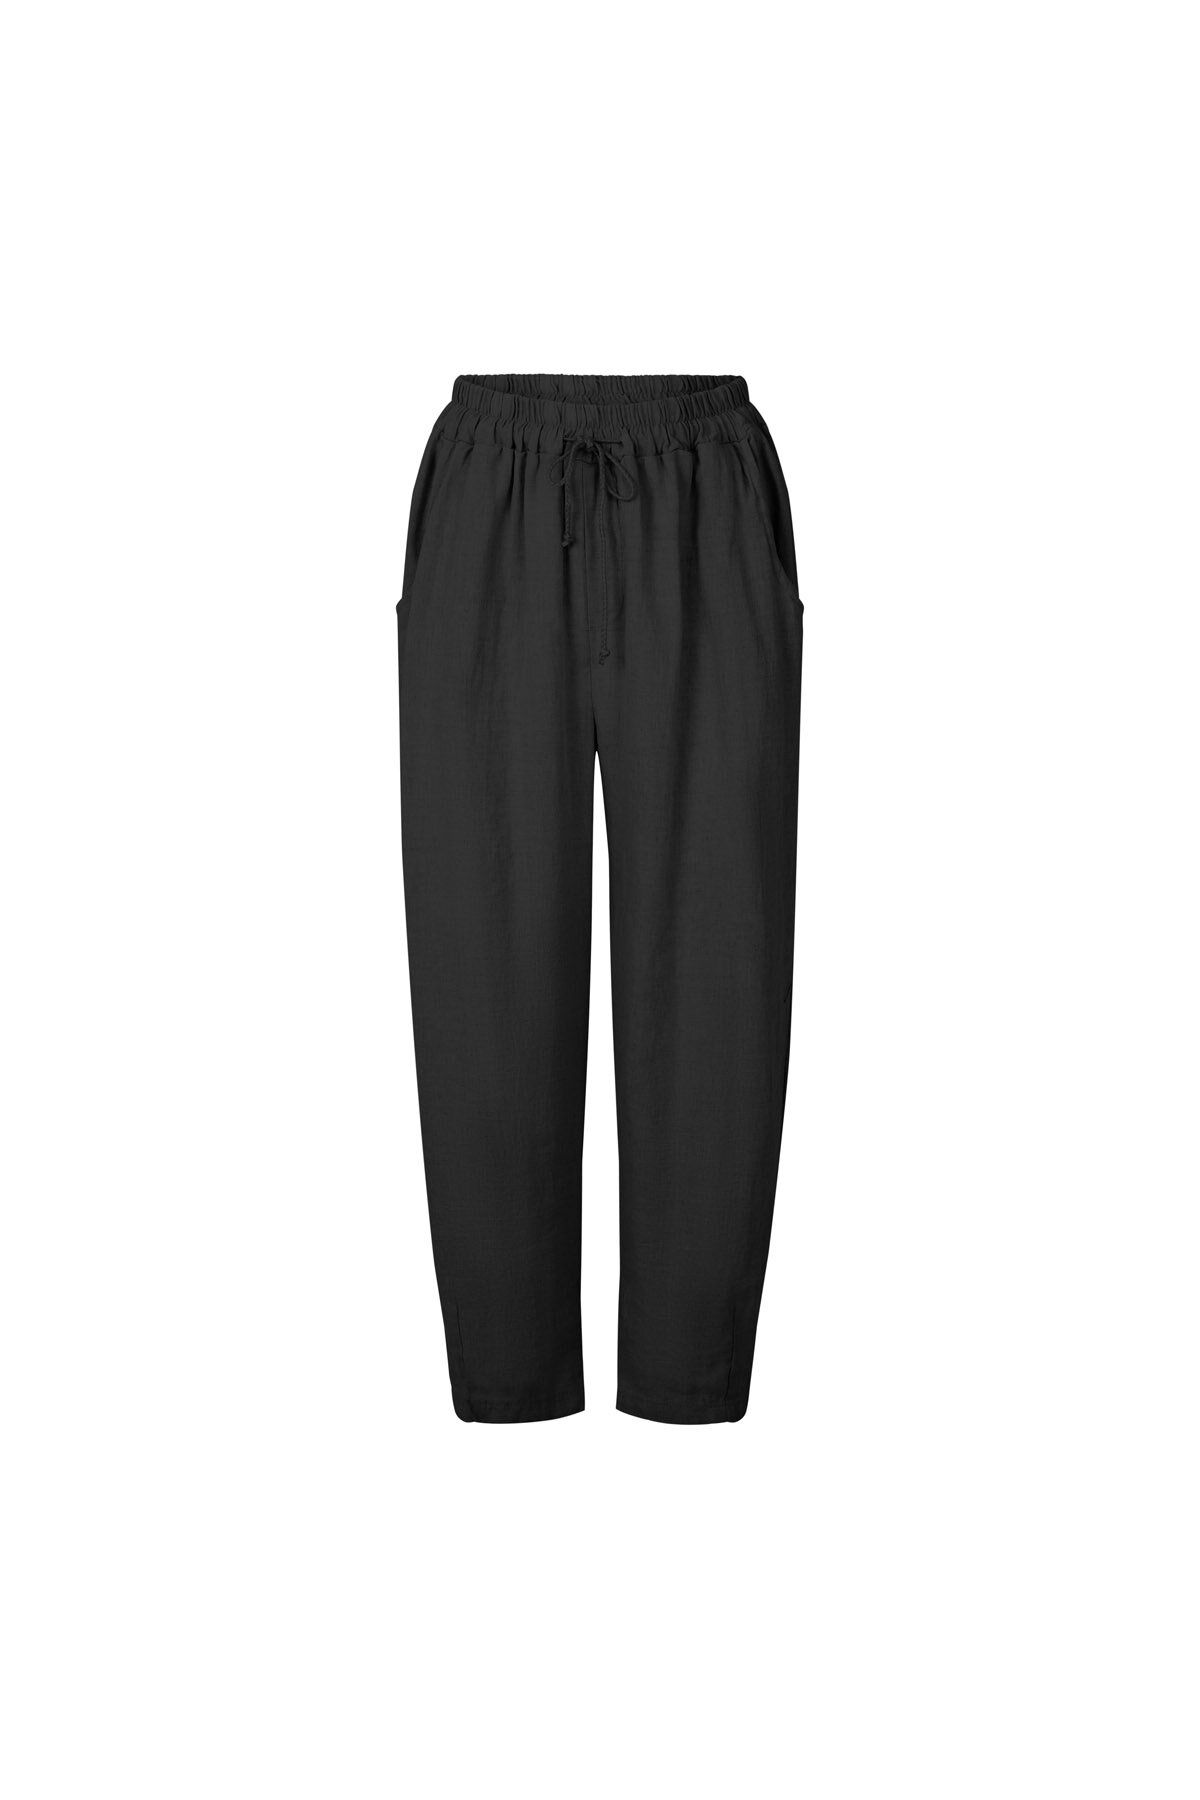 Coop JUST RELAX PANT - Brand-COOP : Diahann Boutique - COOP SS20